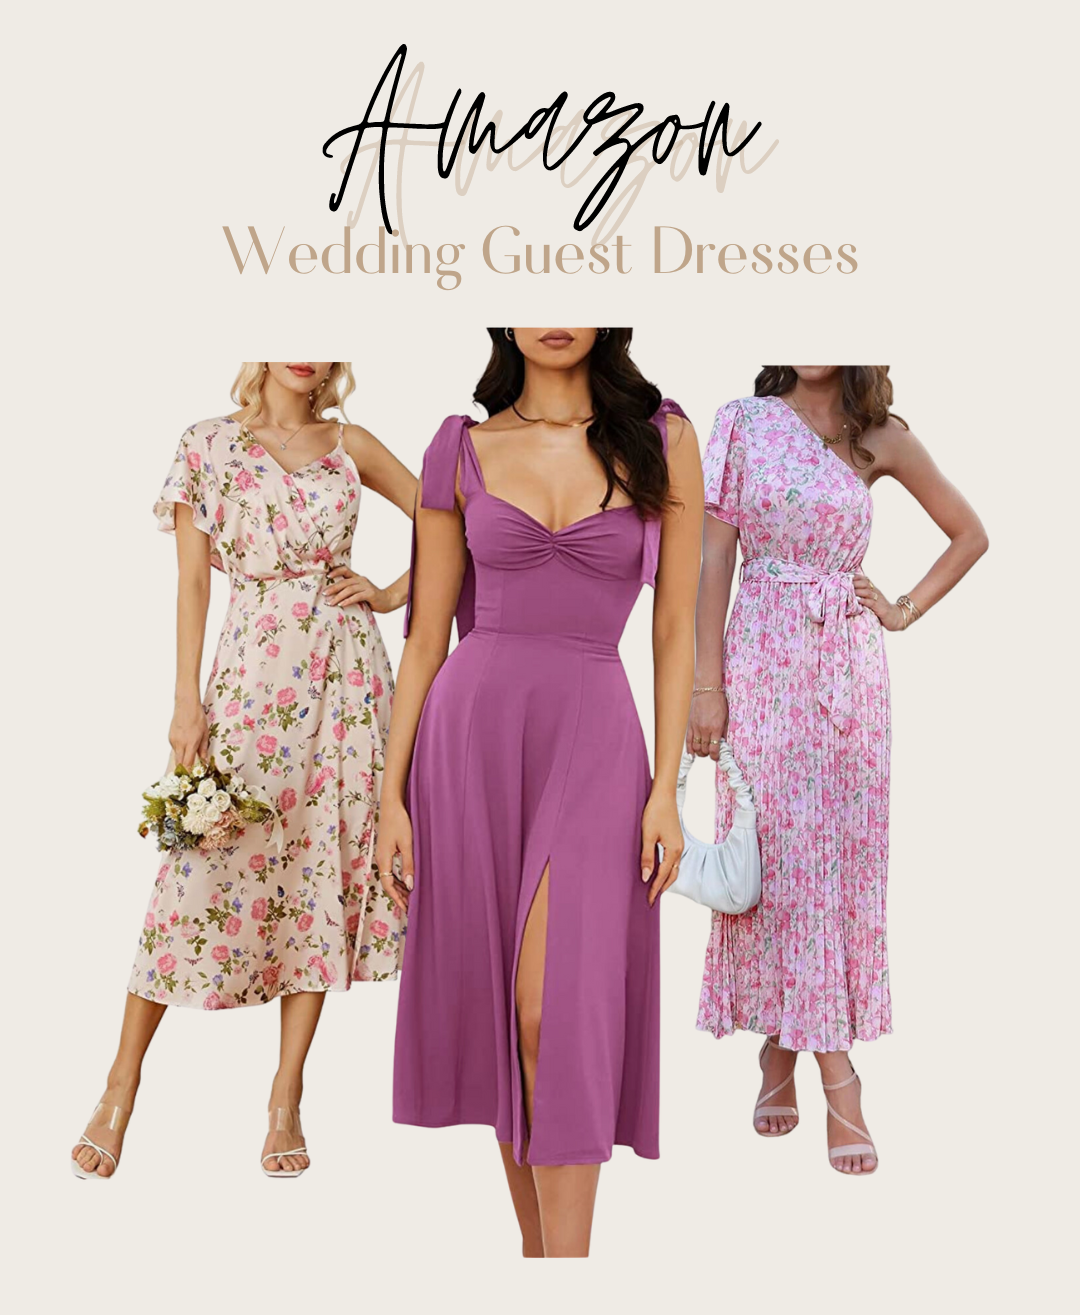 Amazon Wedding Guest Dresses for Summer - Macie Satterfield